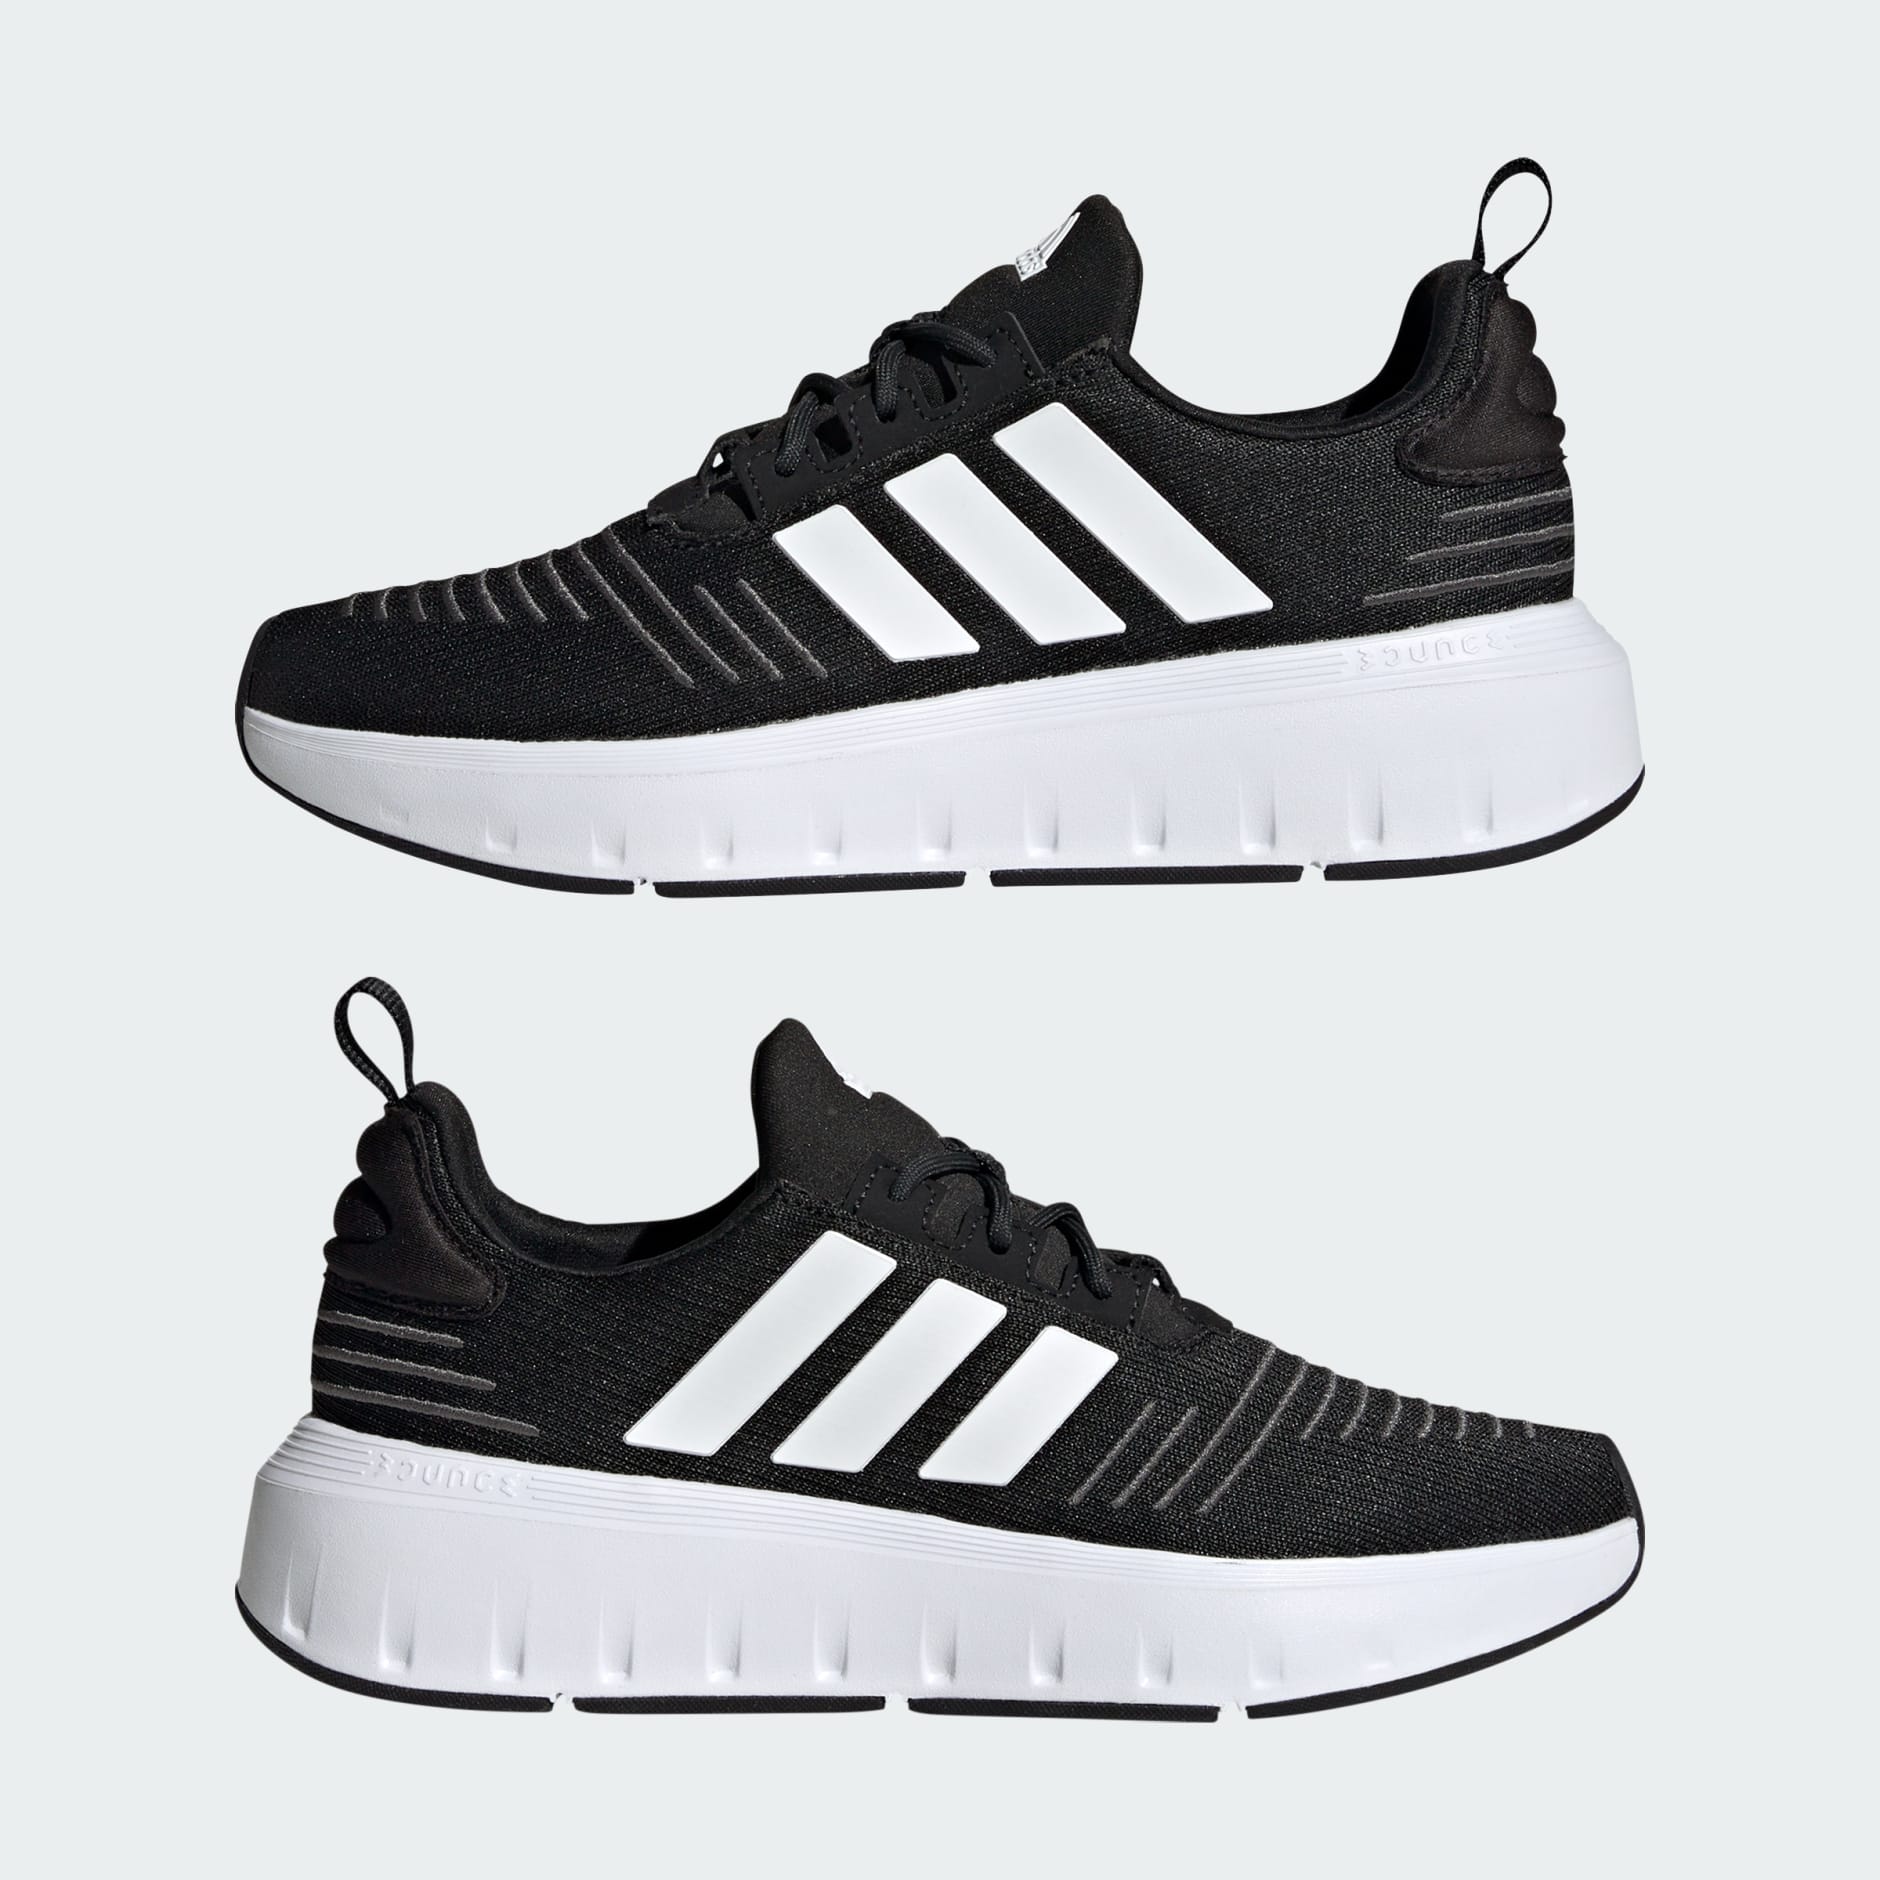 Adidas ASWEEGO Mens Sneakers Shoes Size 8 Color Black/Grey/Grey Comfort